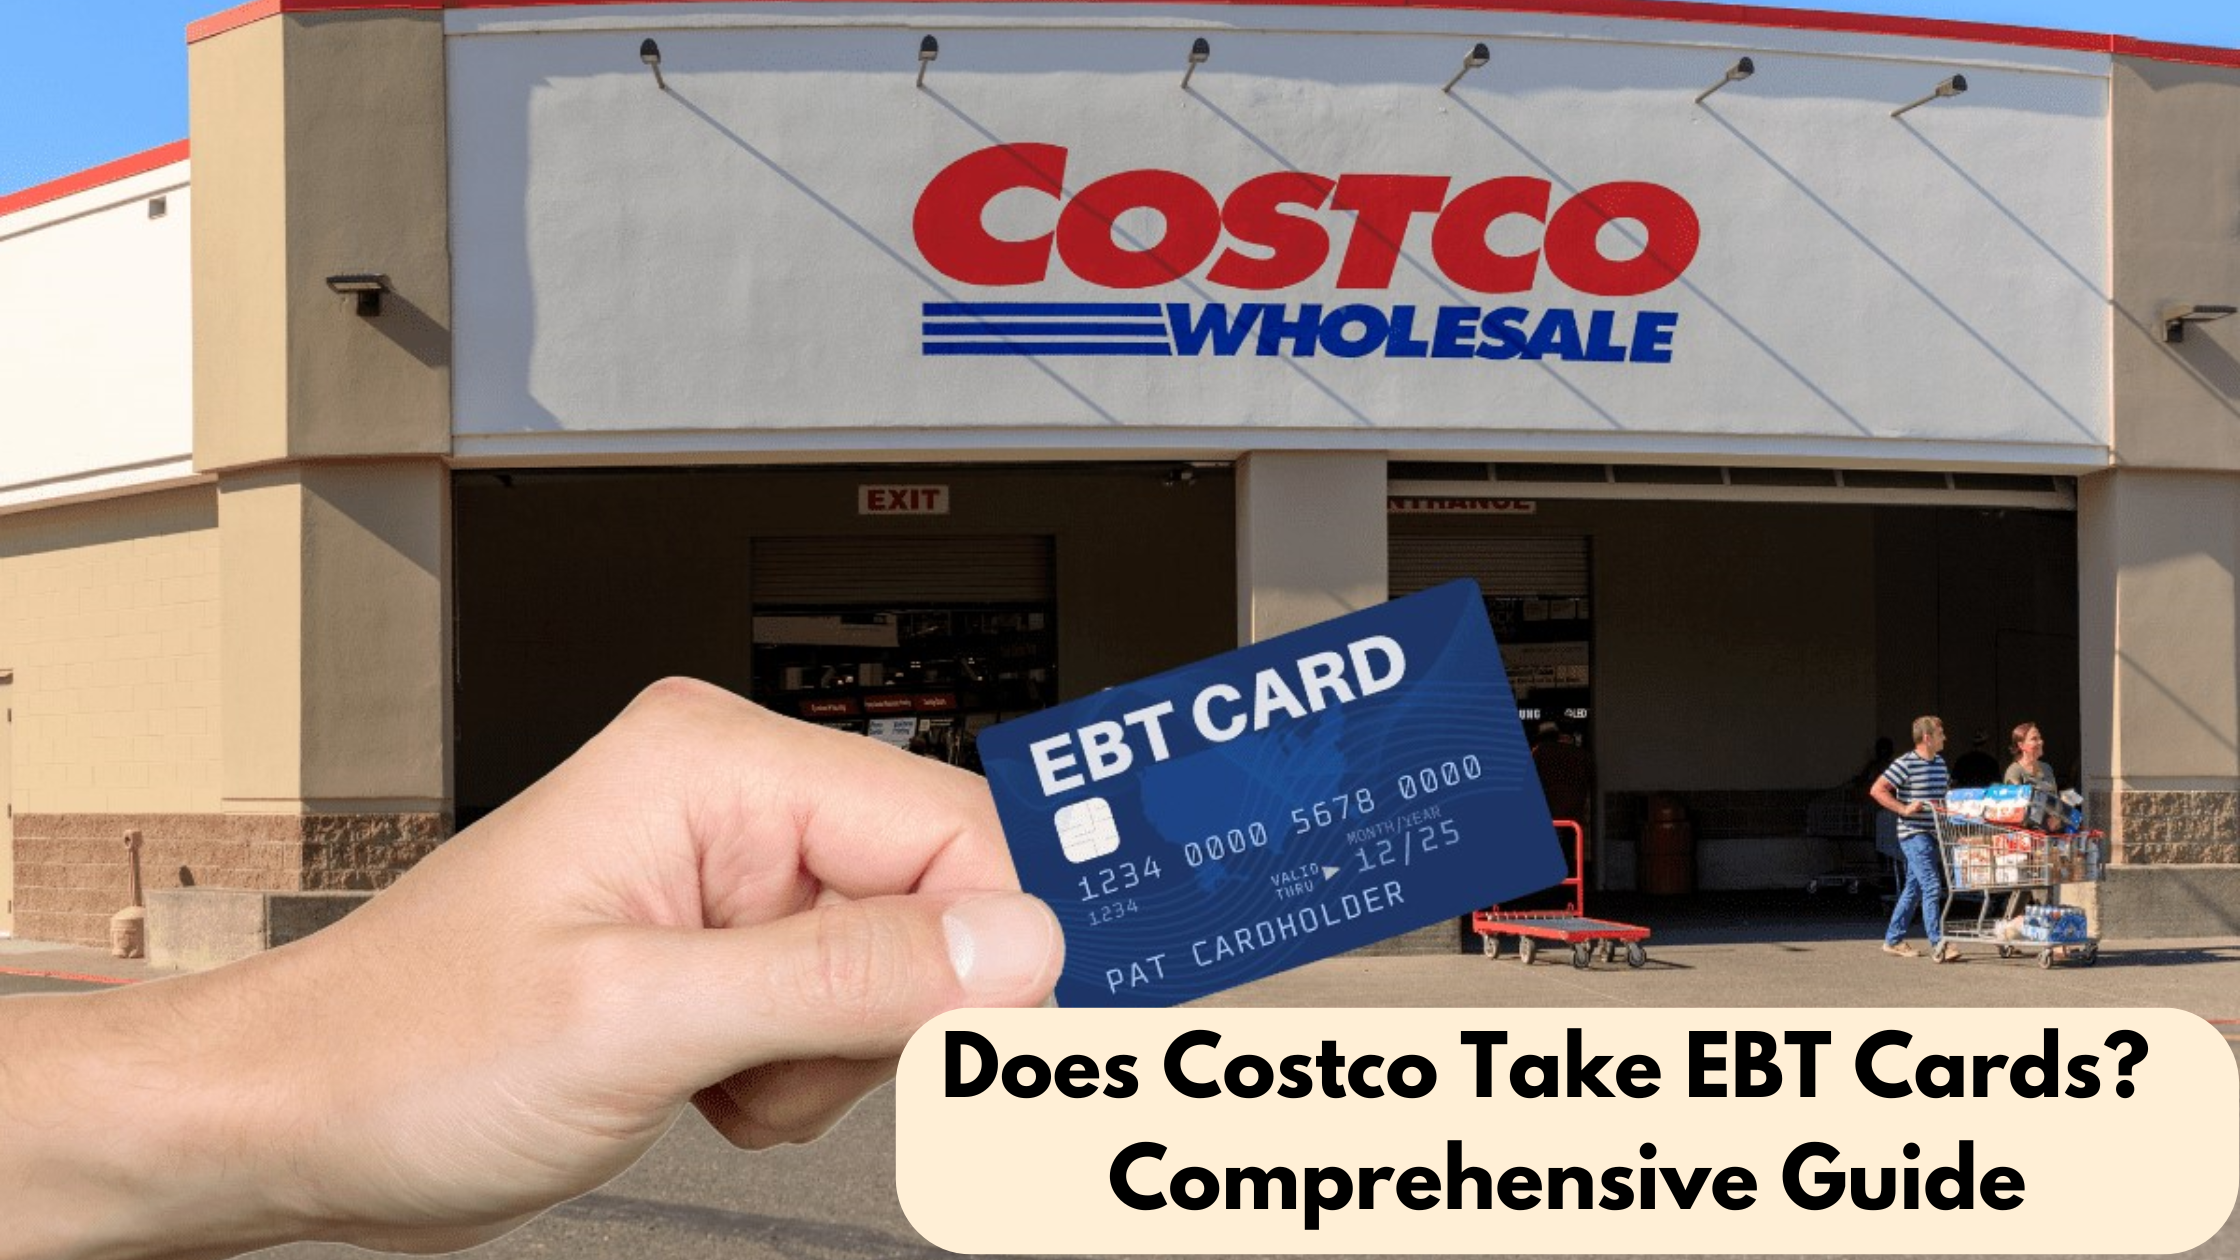 Does Costco Take EBT Cards (Comprehensive Guide)